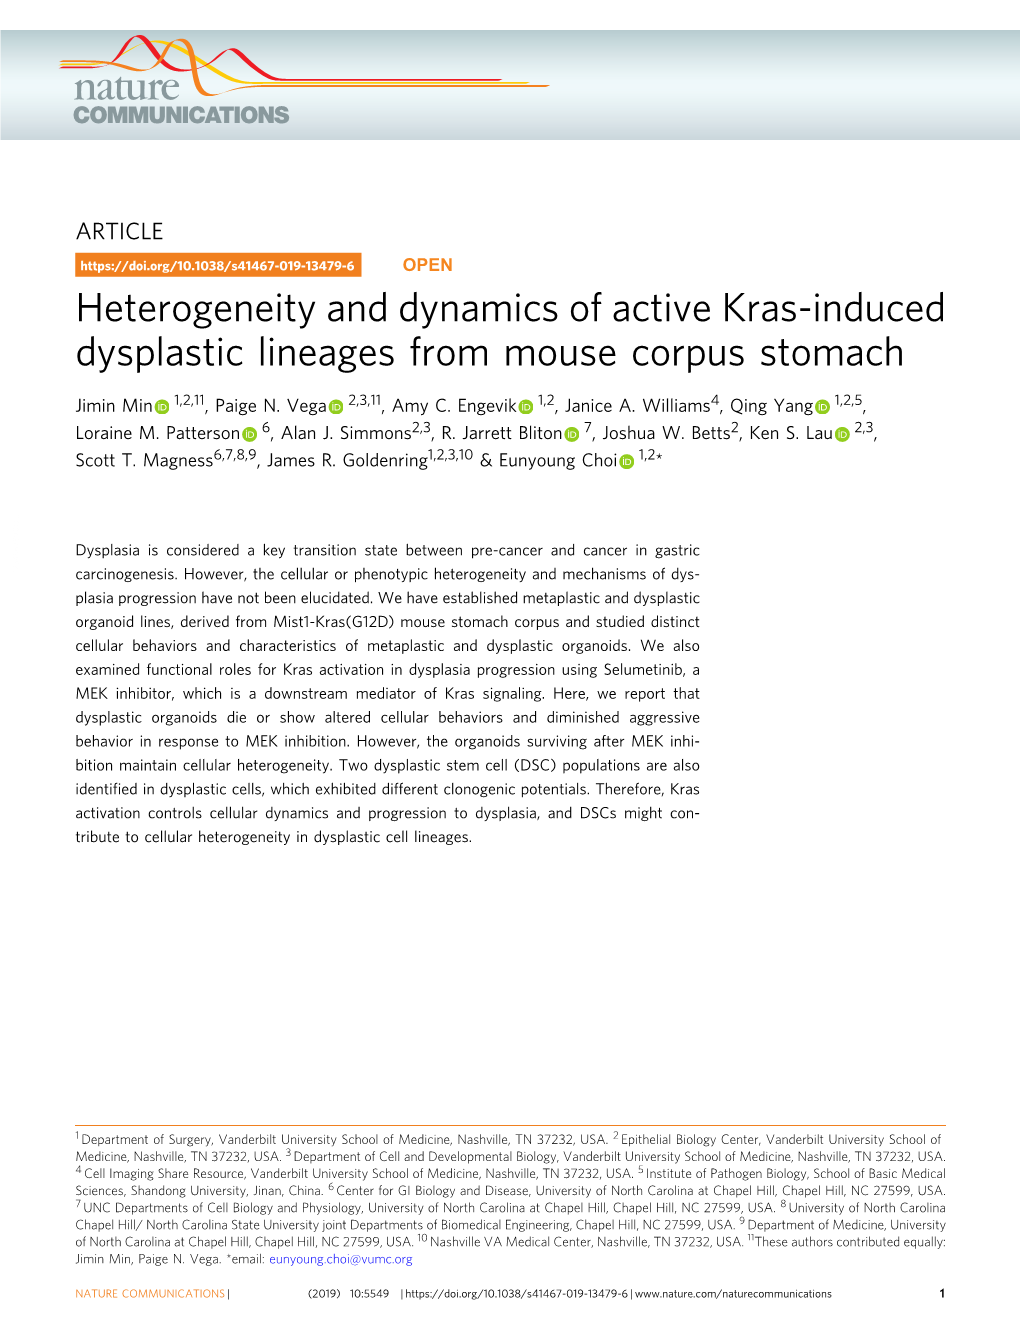 Heterogeneity and Dynamics of Active Kras-Induced Dysplastic Lineages from Mouse Corpus Stomach